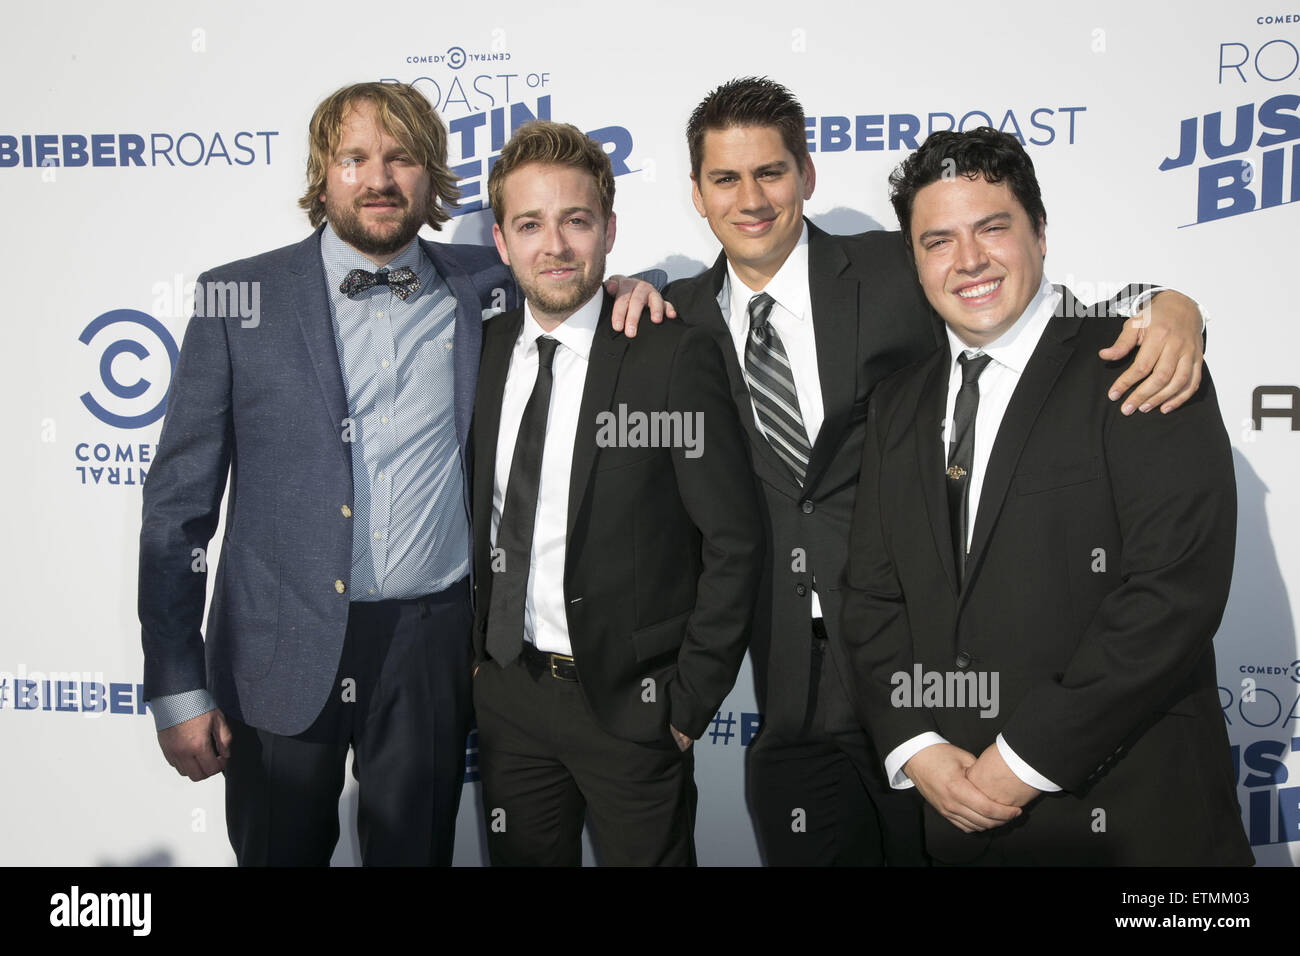 Celebrities attend Comedy Central Roast of Justin Bieber at Sony Studios in Culver City.  Featuring: Lenny Jacobson, Alex Anfanger, Dan Schimpf, Jon Bass Where: Los Angeles, California, United States When: 14 Mar 2015 Credit: Brian To/WENN.com Stock Photo